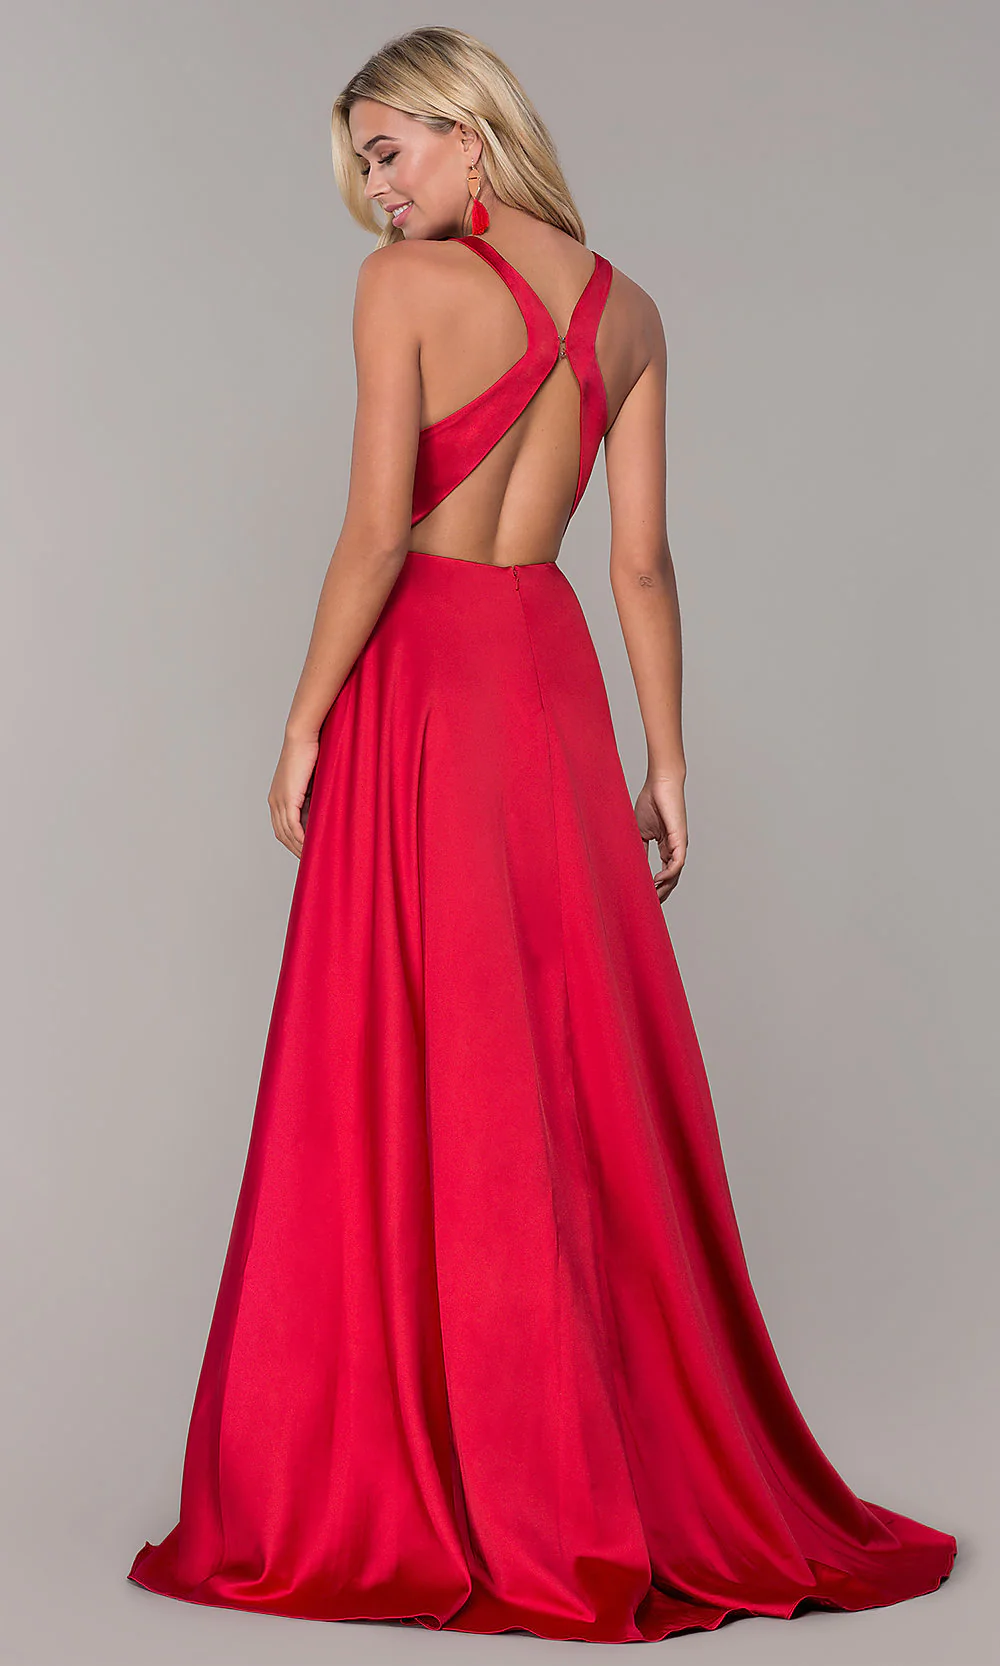 PG Satin Red Evening Gown